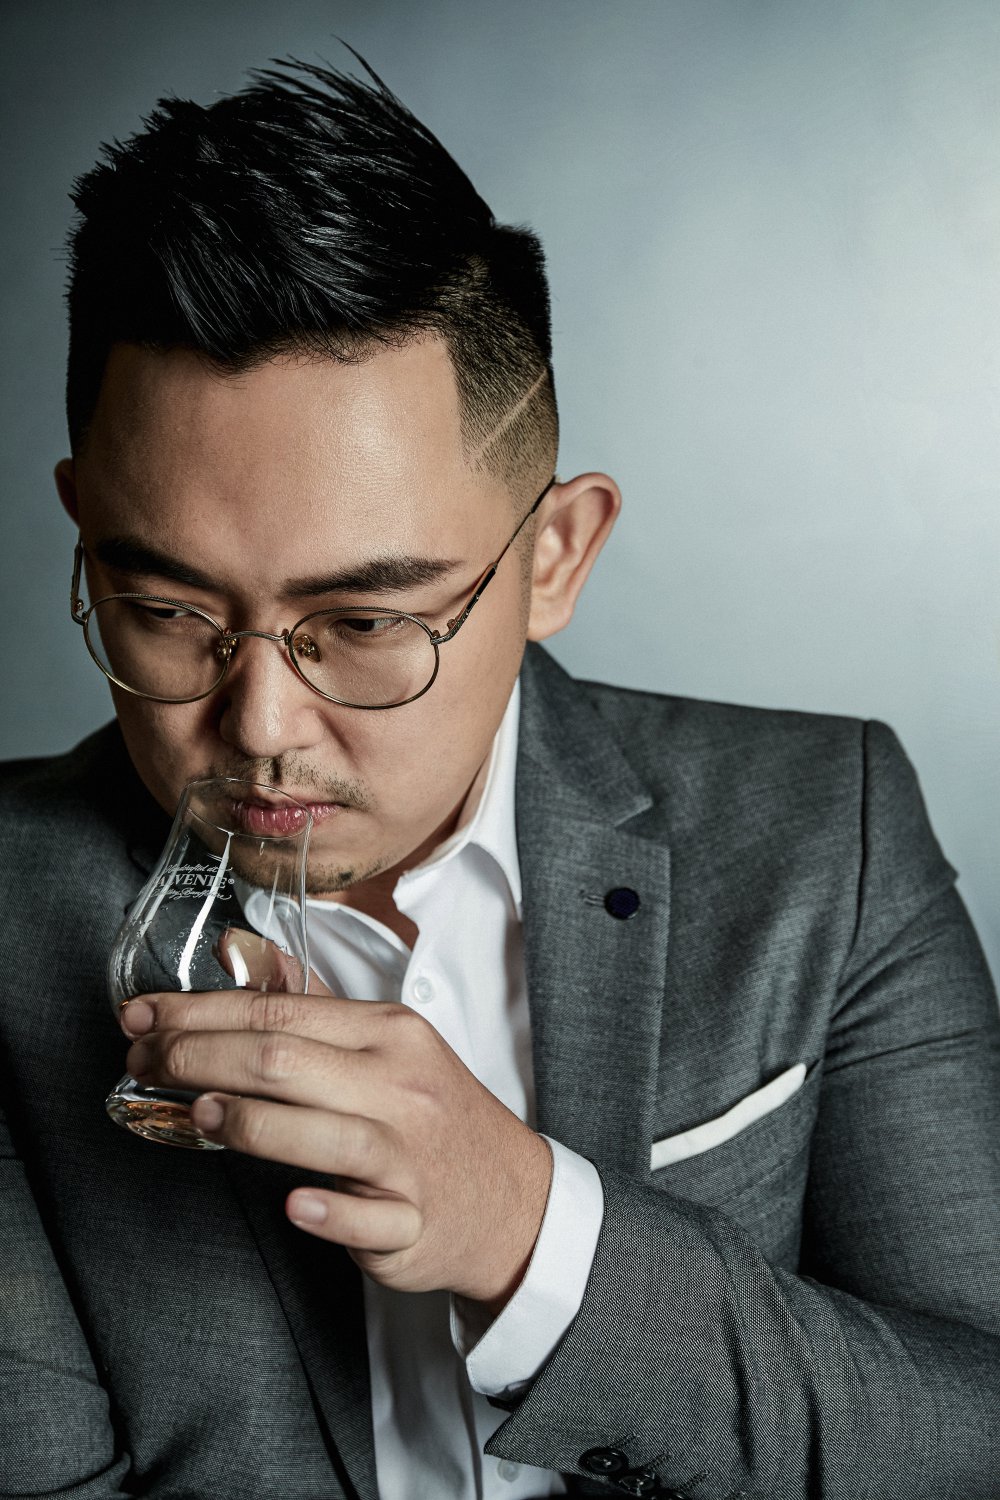 kingssleeve interview Johnny Wong founder of breakout whisky - Johnny Ong: Success Is Not One’s Alone